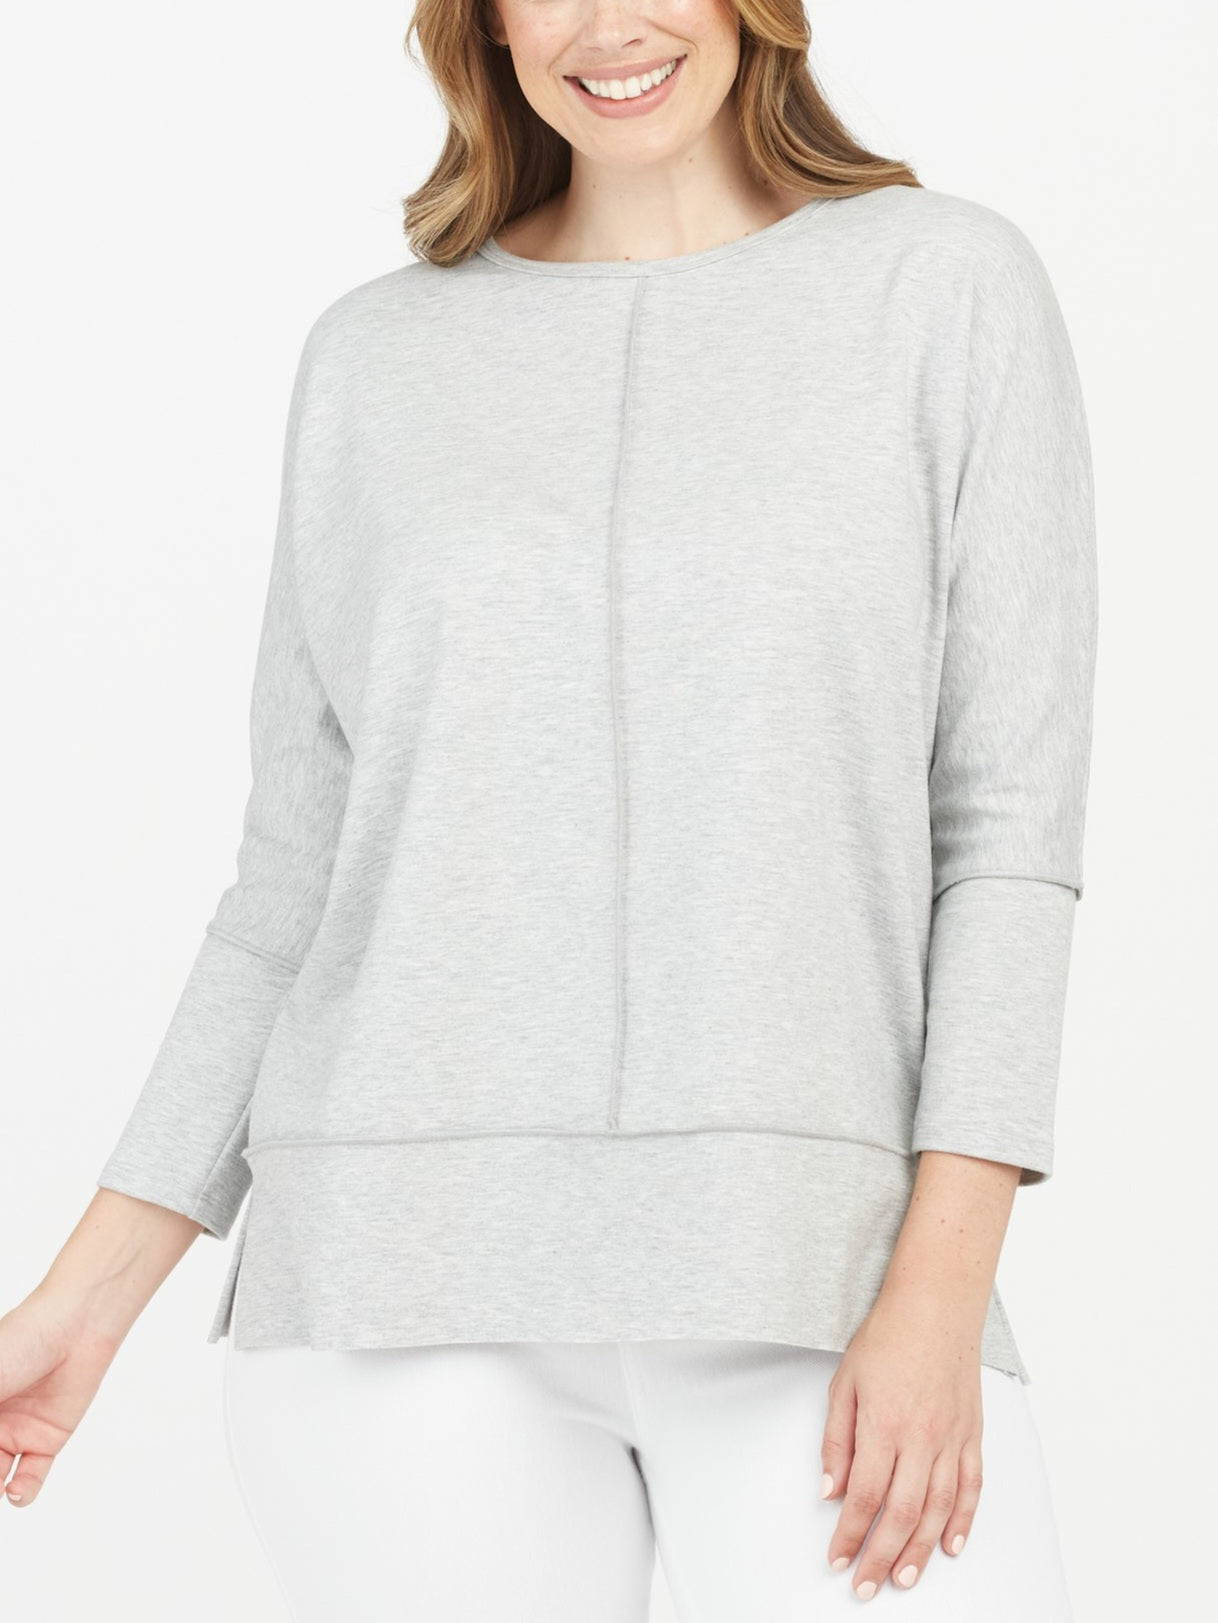 Spanx - Perfect Length Top, Dolman 3/4 Sleeve - Soft Grey Heather – Spinout